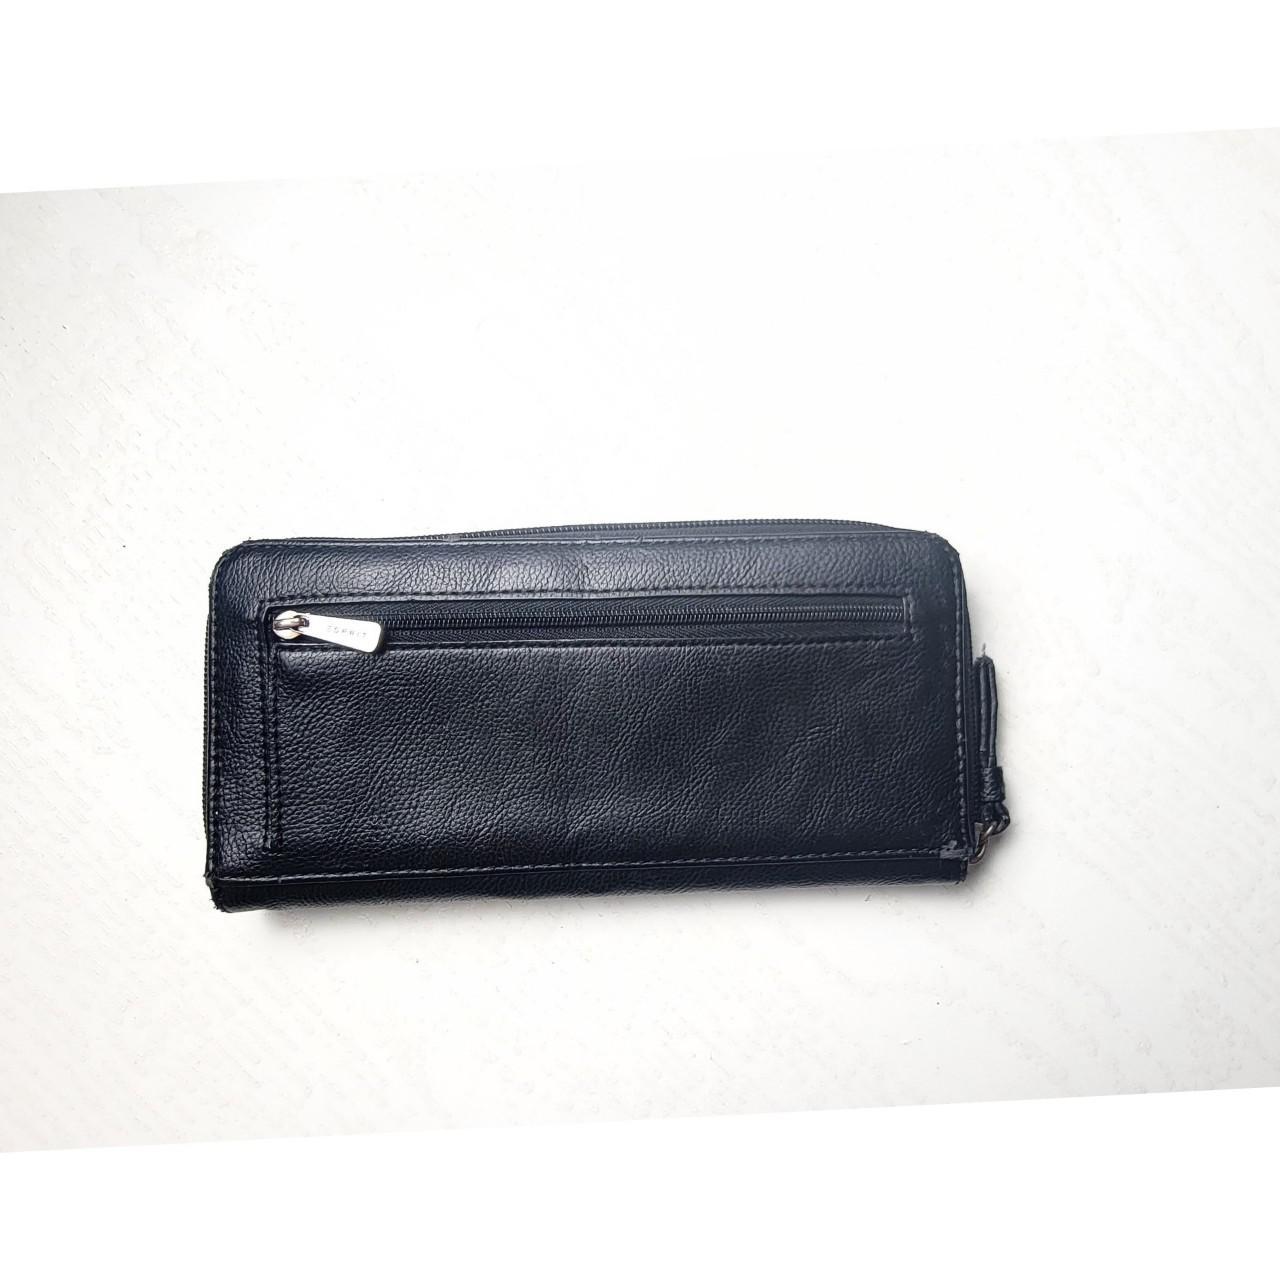 Product Image 2 - Esprit Wallet

Black Leather with white